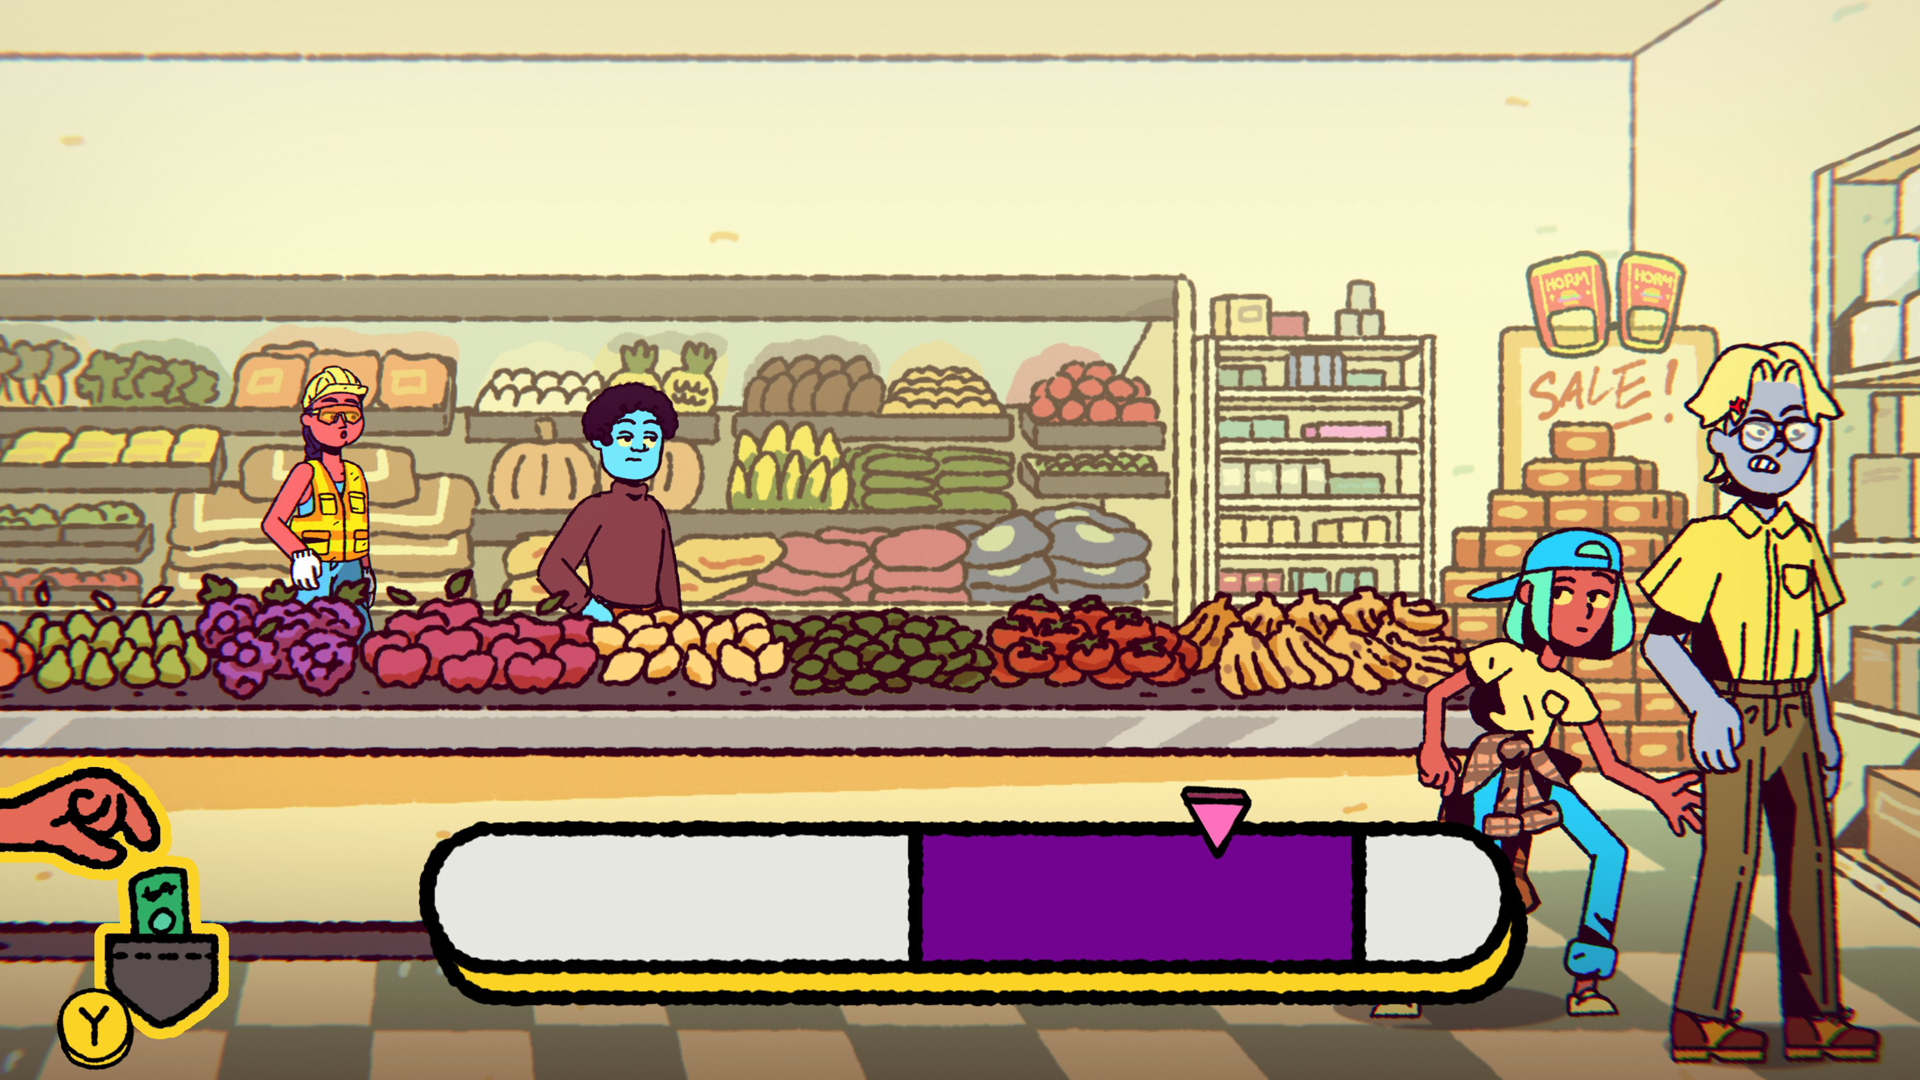 Ali pickpocketing one of her classmates in the grocery store. The pickpocketing minigame is shown on the bottom of the screen.